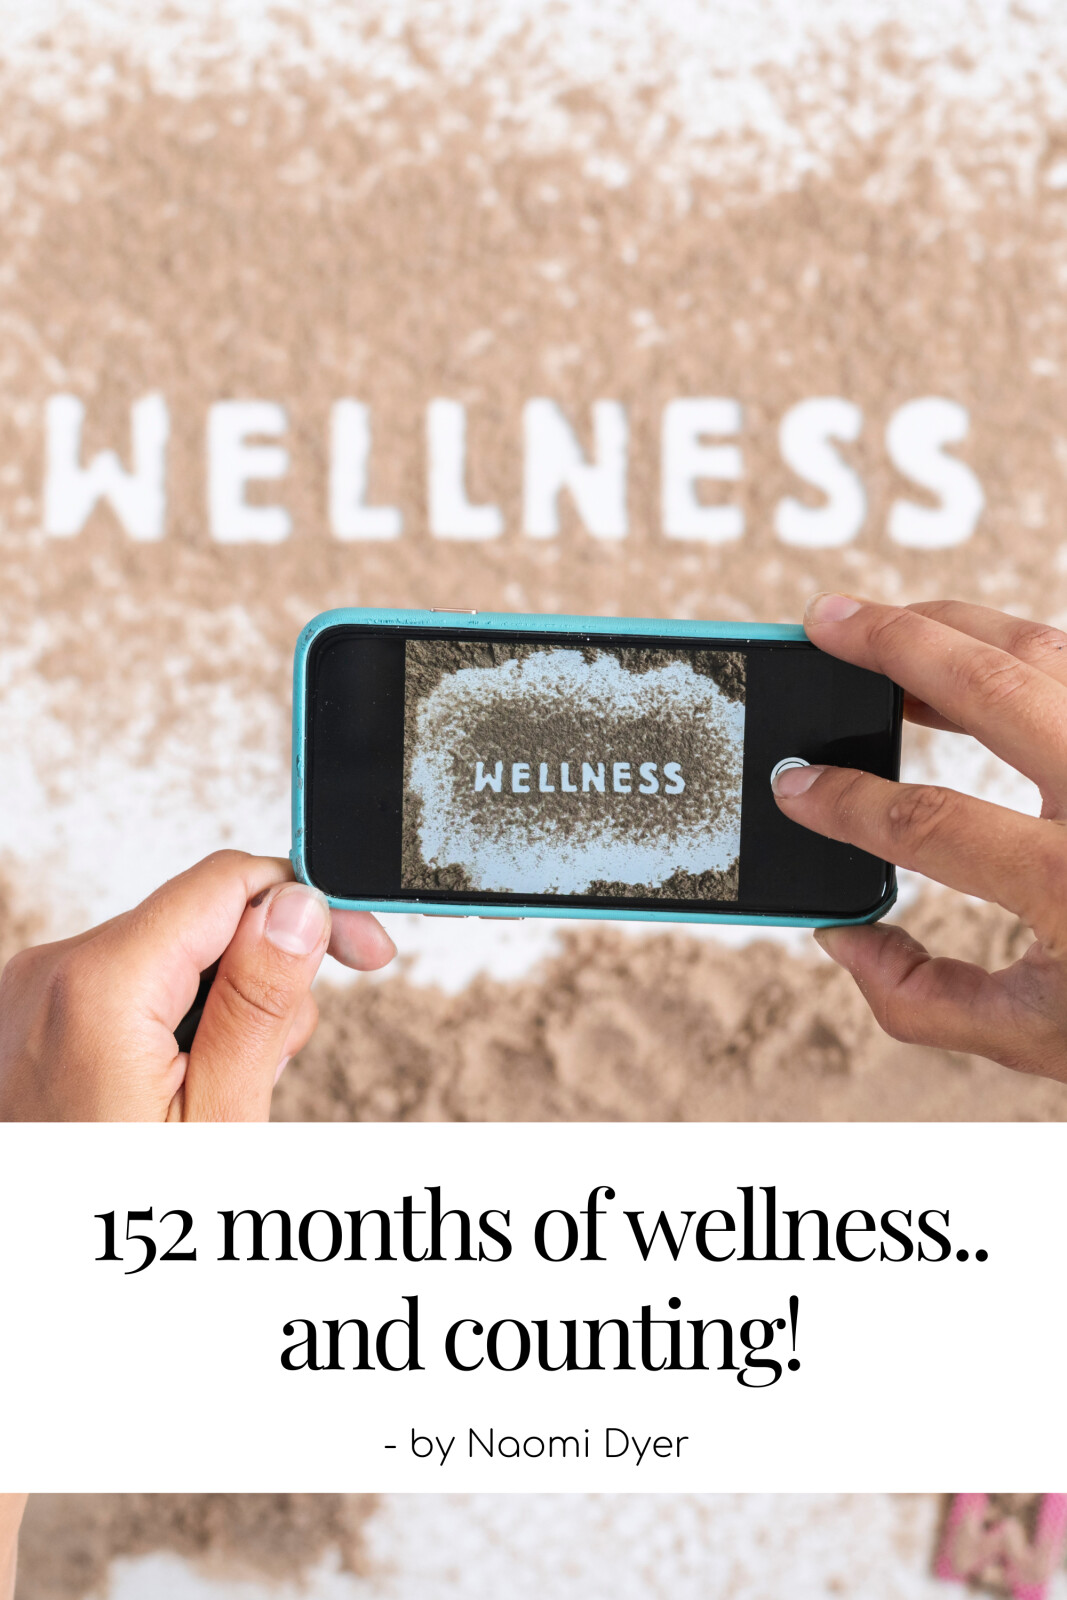 152 months of wellness...and counting!